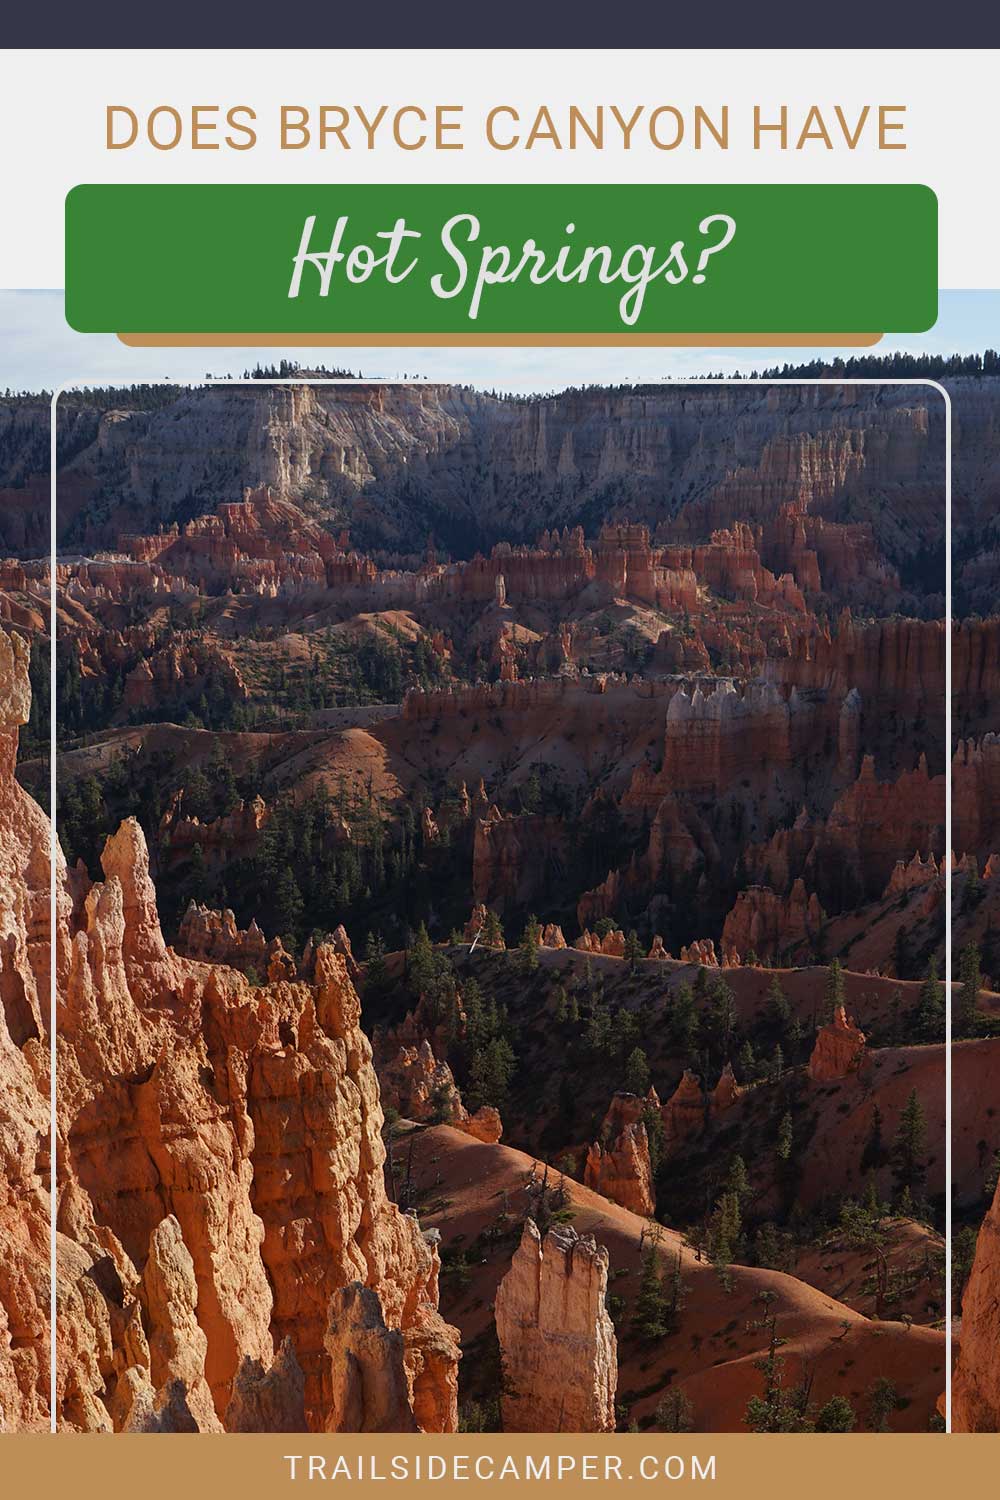 Does Bryce Canyon Have Hot Springs?